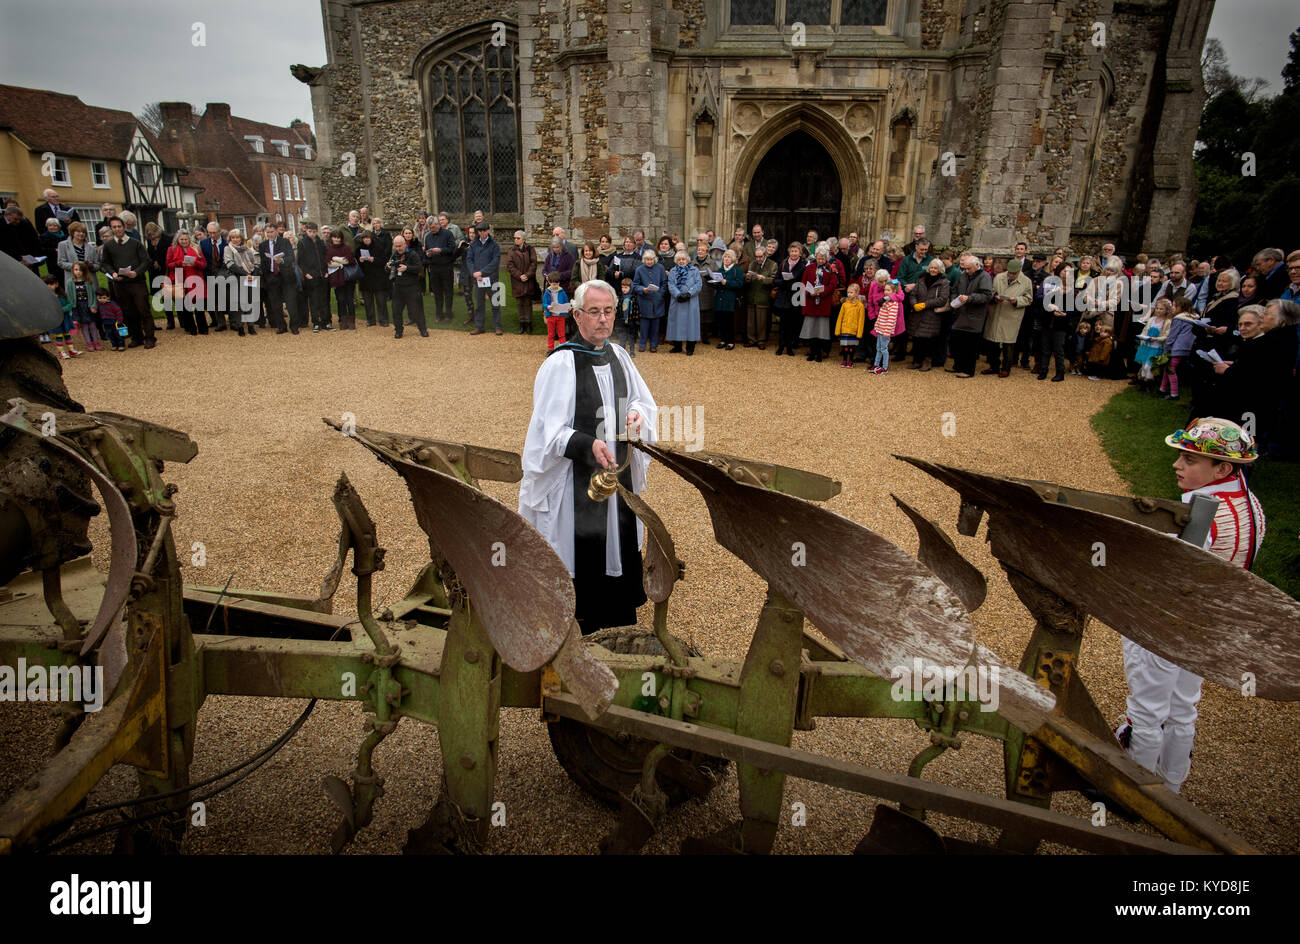 Plough Sunday, Thaxted Essex UK. 14 January 2018. Archdeacon Robin King from Stansted with a censer blesses the plough in the churchyard of Thaxted parrish church as the Thaxted Morris Men perform a ploughing dance.Plough Sunday is a traditional English celebration of the beginning of the agricultural year that has seen some revival over recent years. Plough Sunday celebrations usually involve bringing a ploughshare into a church with prayers for the blessing of the land. Accordingly, work in the fields did not begin until Plough Monday. Credit: BRIAN HARRIS/Alamy Live News Stock Photo